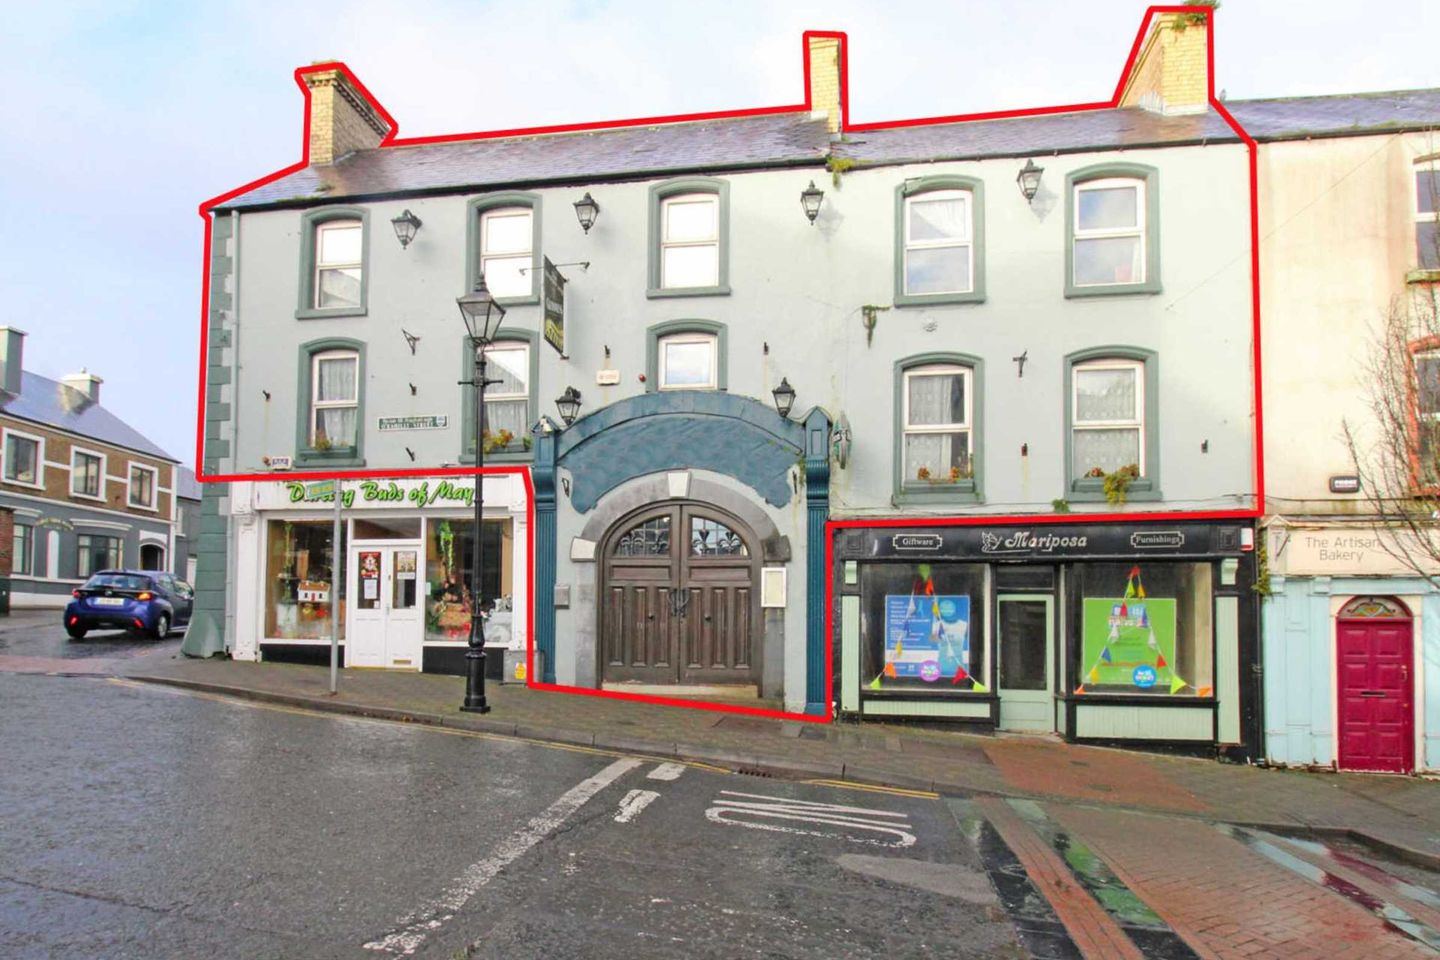 The Old Central Hotel & The Broken Jug, Ballina, Co. Mayo, F26KR83